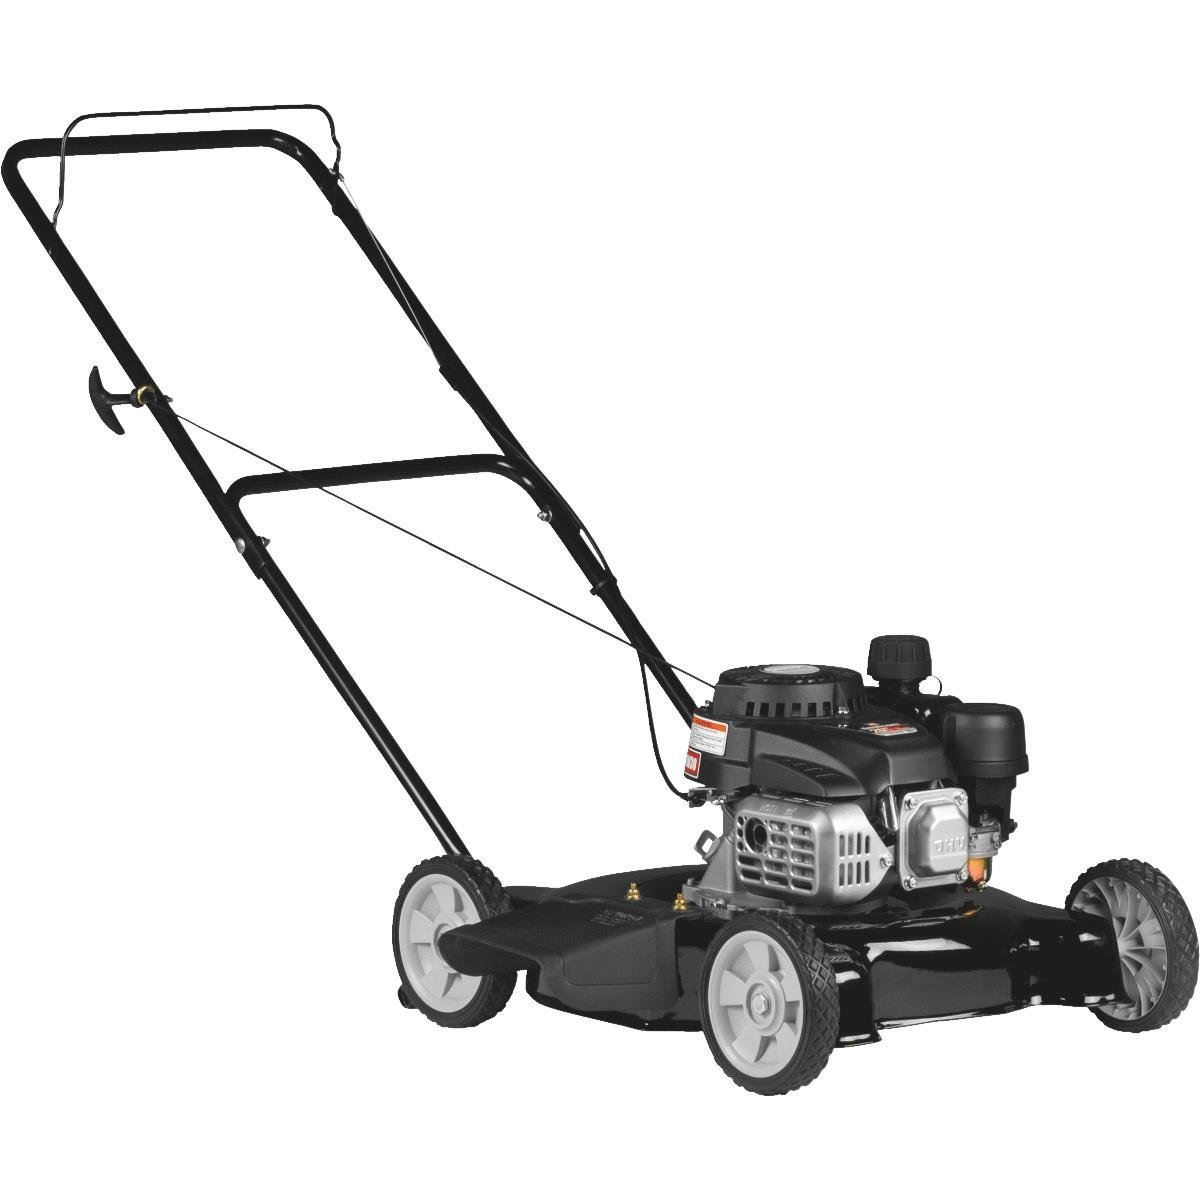 Lawn Mower Drawing | Free download on ClipArtMag